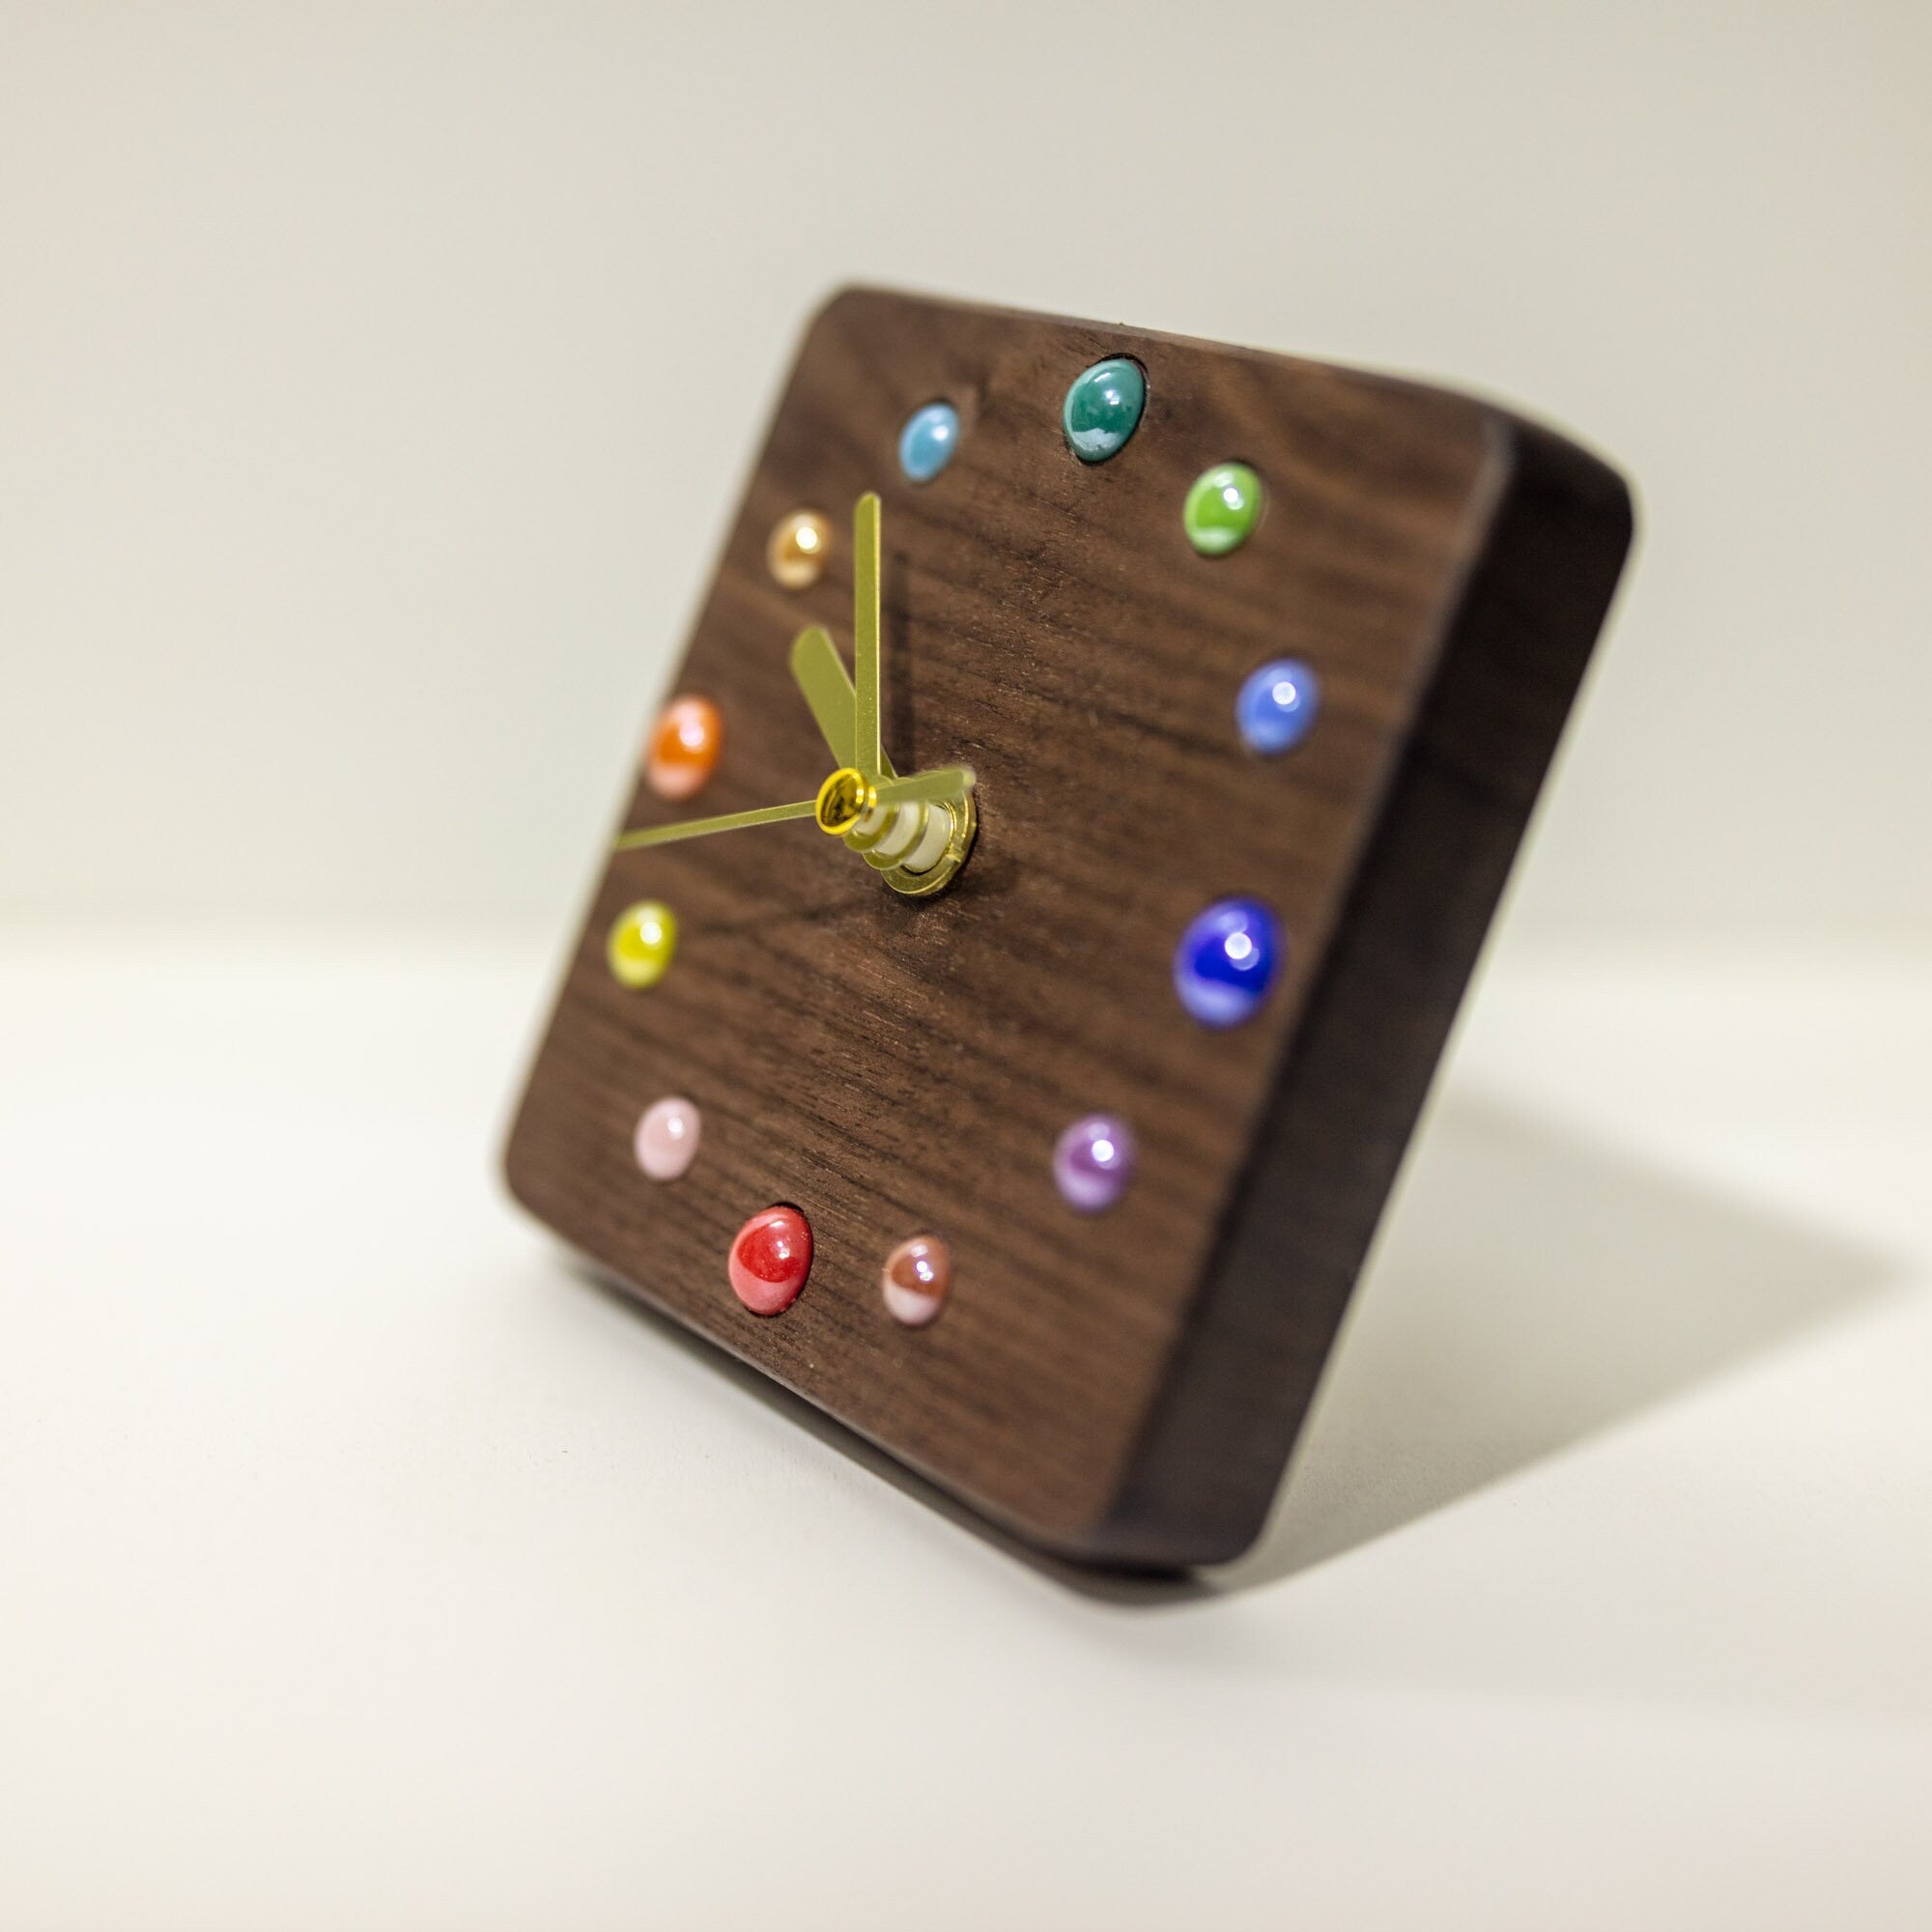 Artisan Handcrafted Black Walnut Desktop Clock with Ceramic Bead Markers - Eco-Friendly - Silent Movement - Perfect Gift-ArtWorkCrafts.com